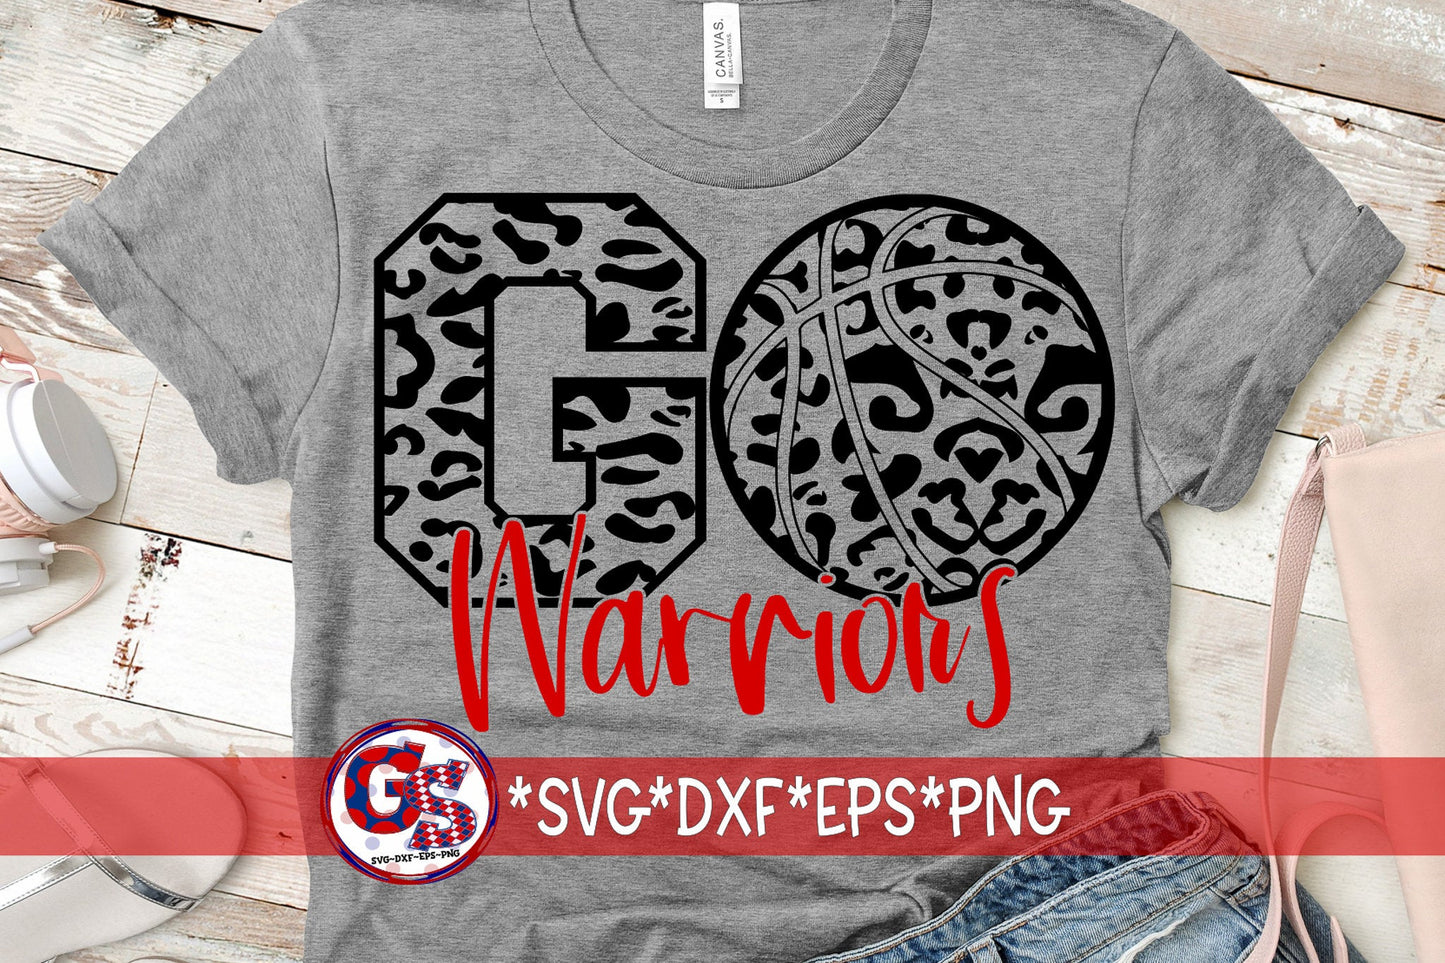 Go Warriors Basketball svg dxf eps png. Warriors Basketball SvG | Go Warriors DxF | Warriors EpS | Go Warriors | Instant Download Cut File